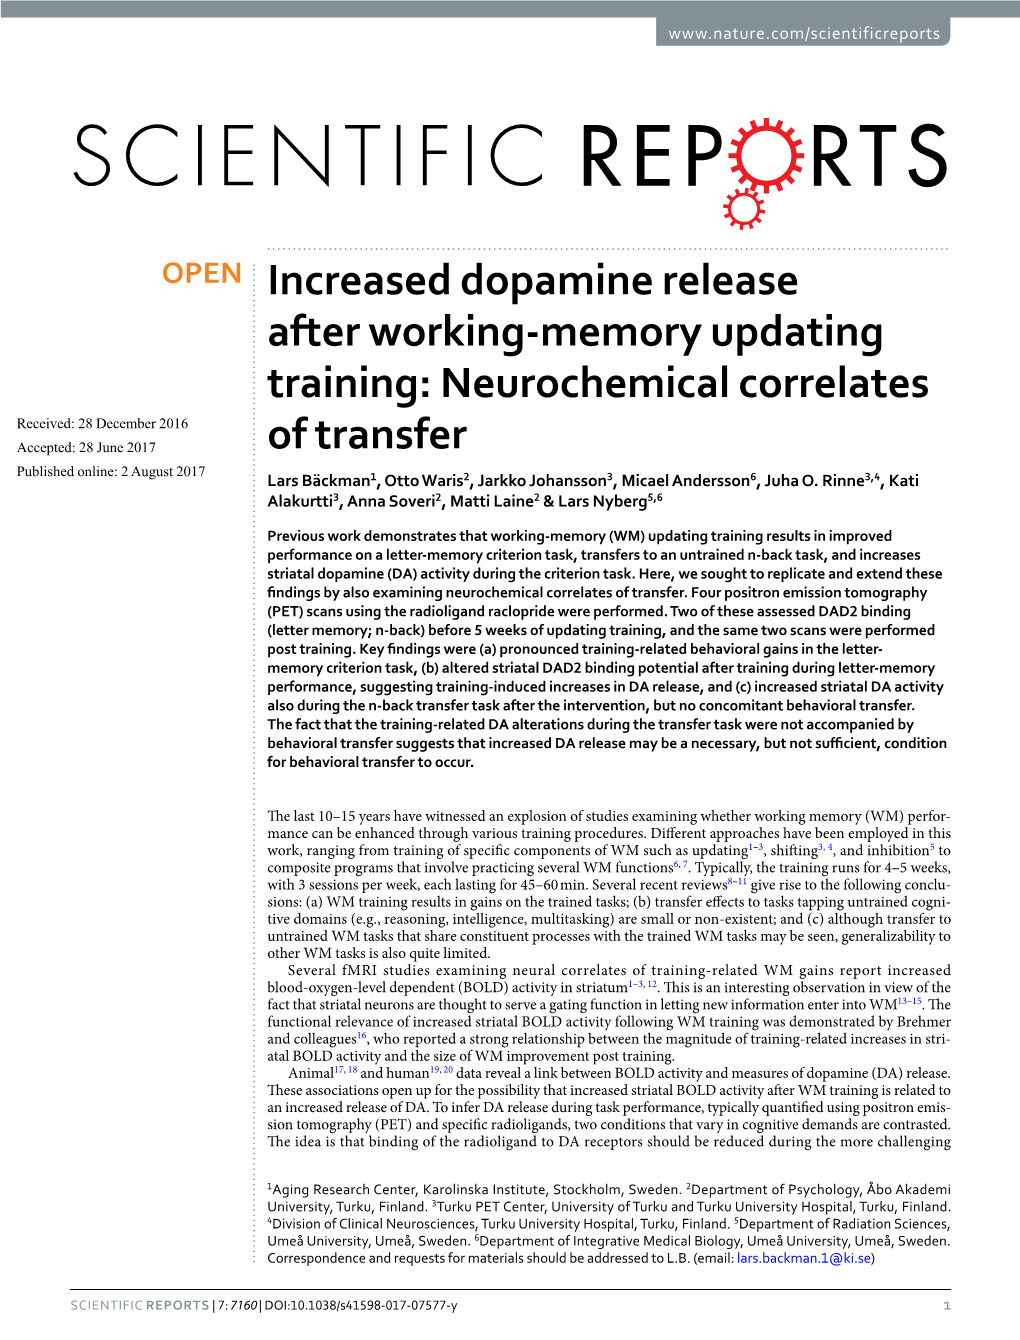 Increased Dopamine Release After Working-Memory Updating Training: Neurochemical Correlates of Transfer